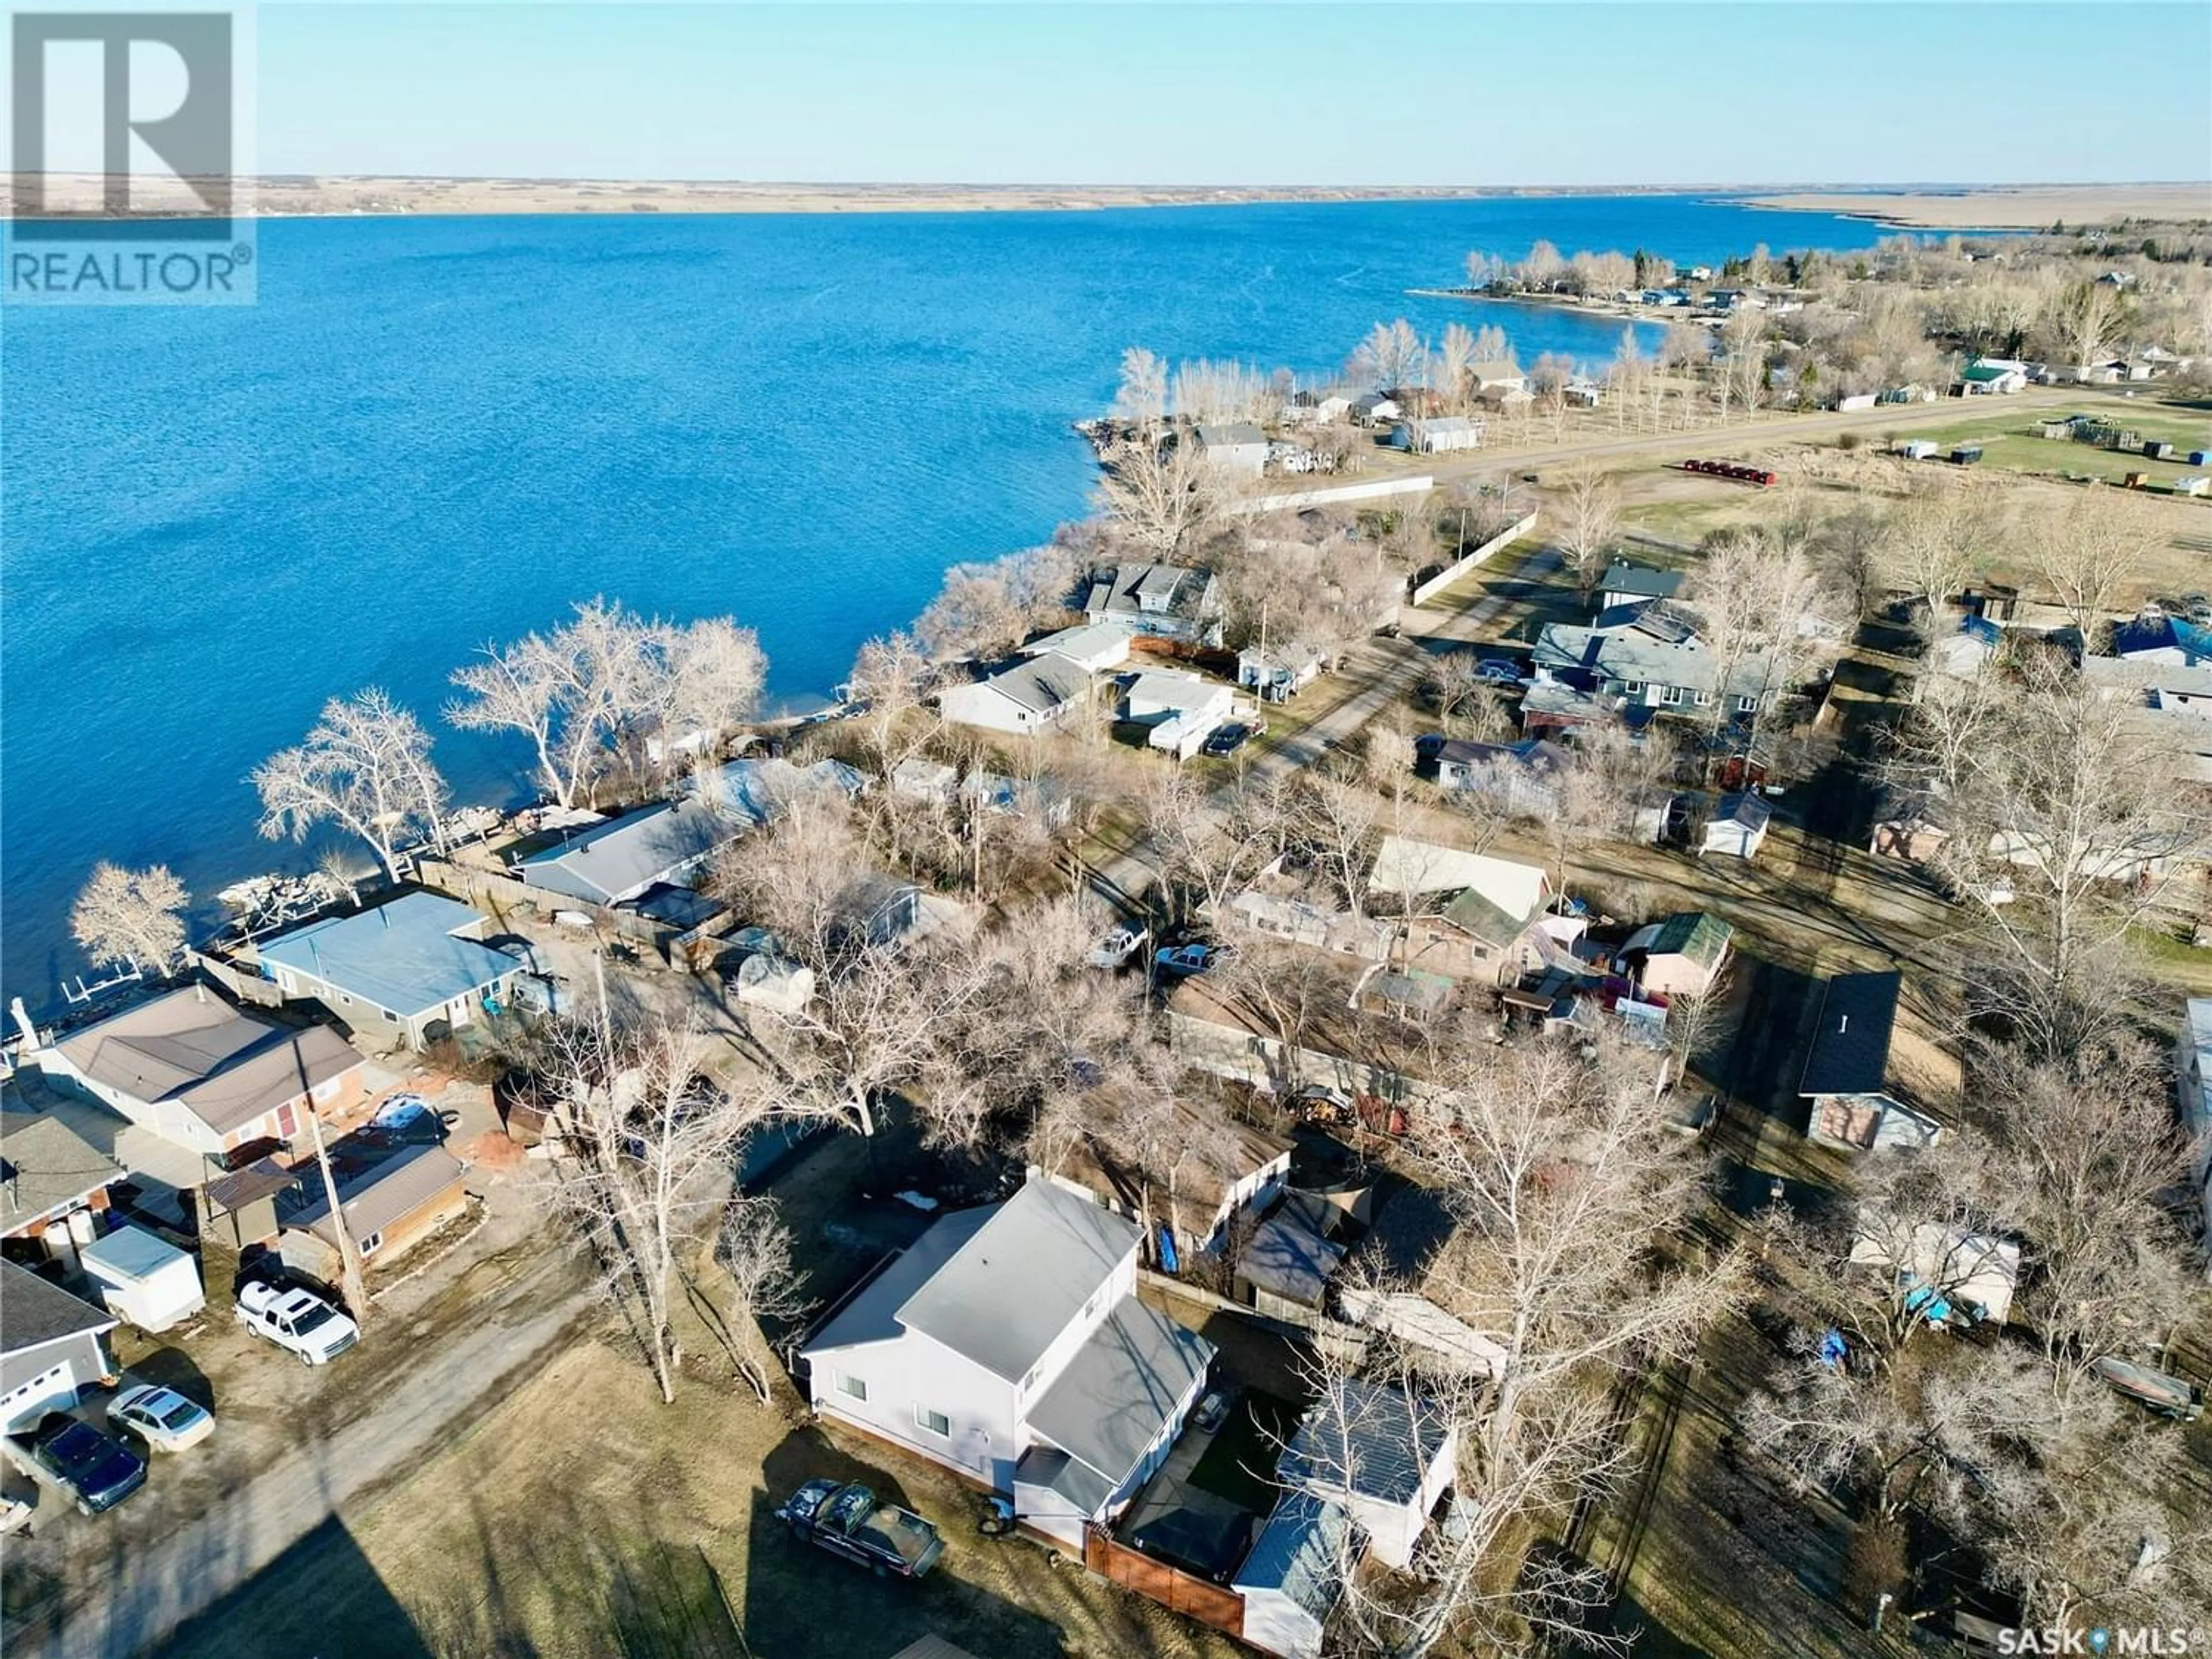 Lakeview for 231 Lakeshore DRIVE, Wee Too Beach Saskatchewan S0G1C0